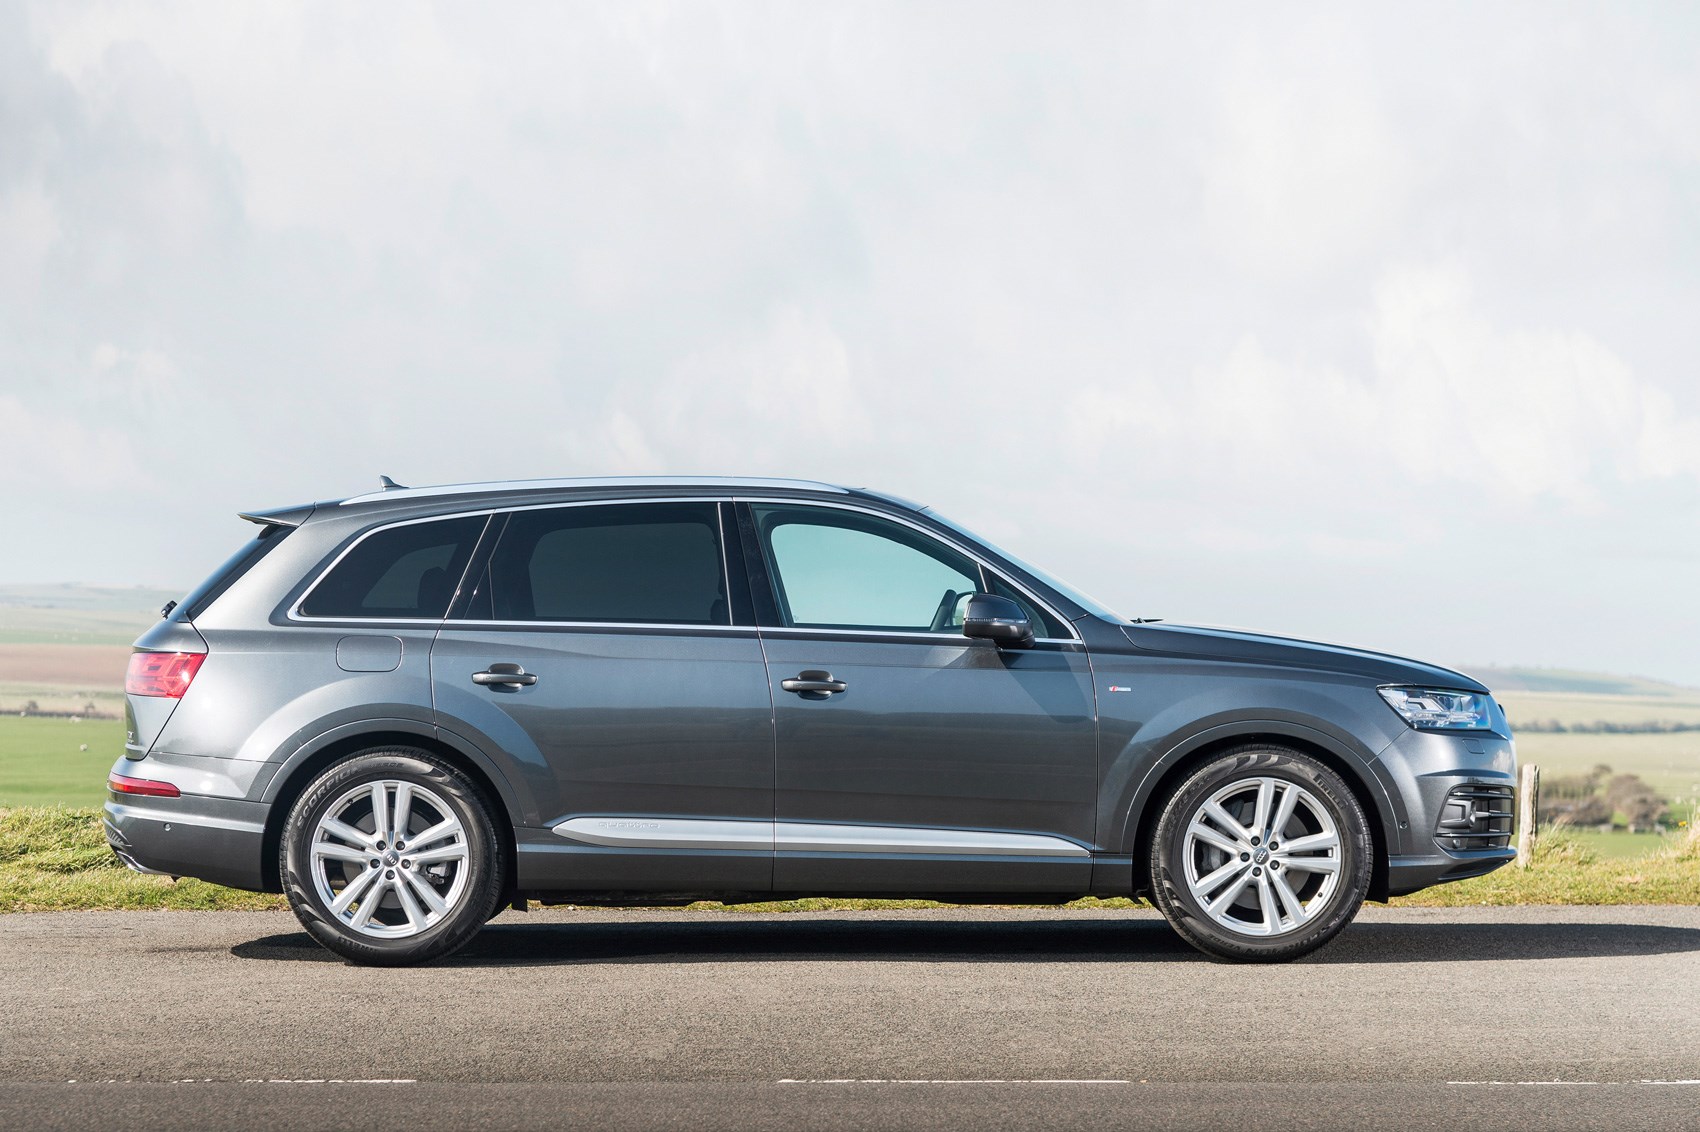 Audi Q7 SUV long term review, first report - Introduction